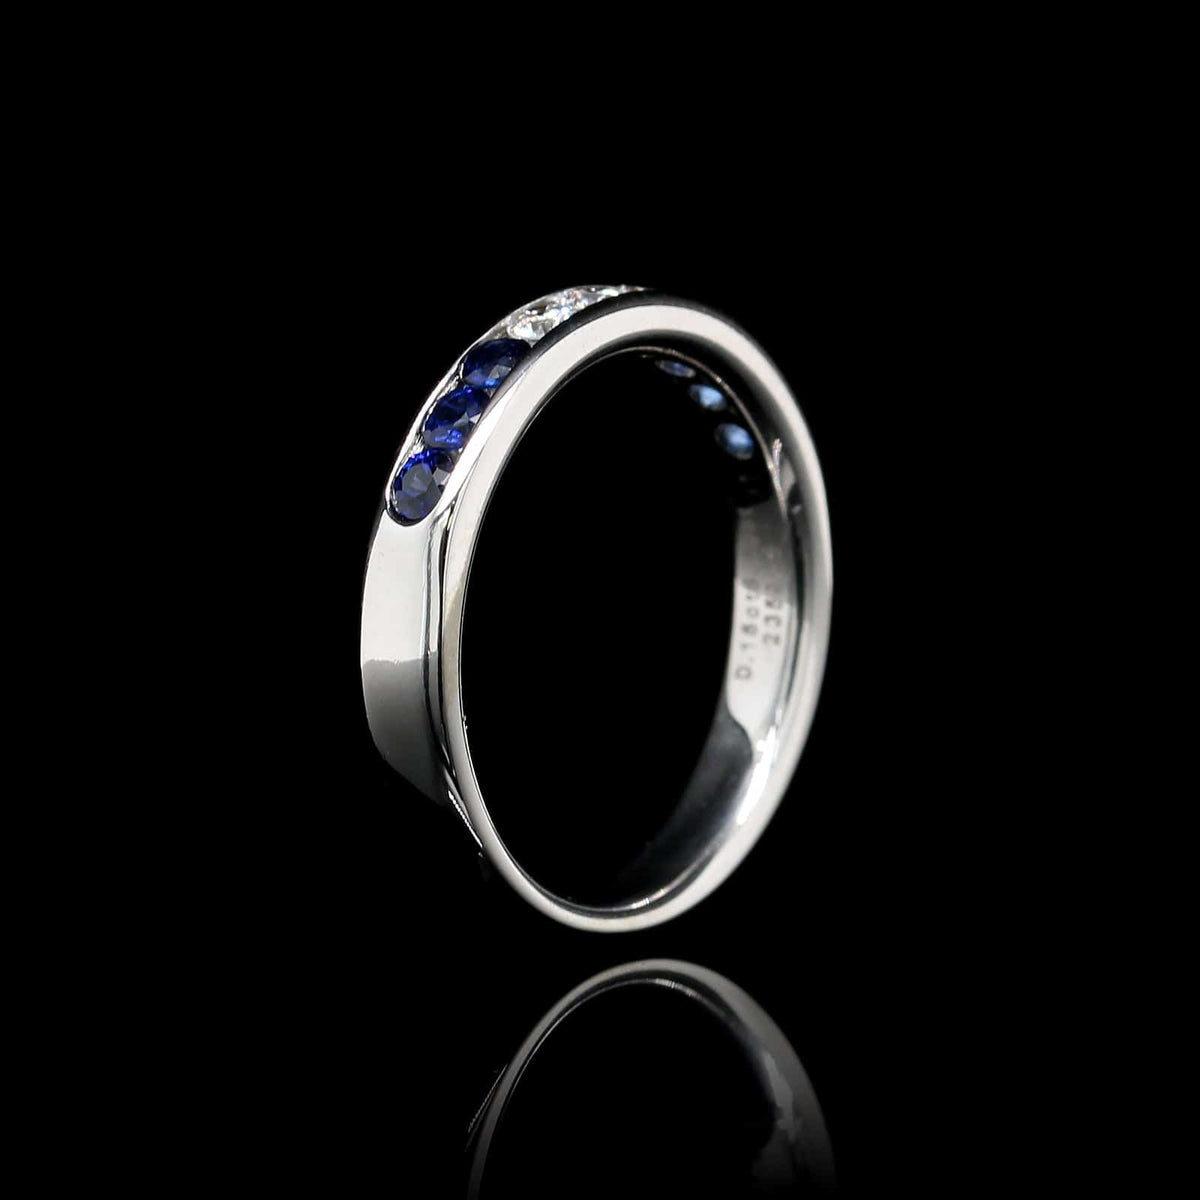 18K White Gold Estate Sapphire and Diamond Band, White gold, Long's Jewelers